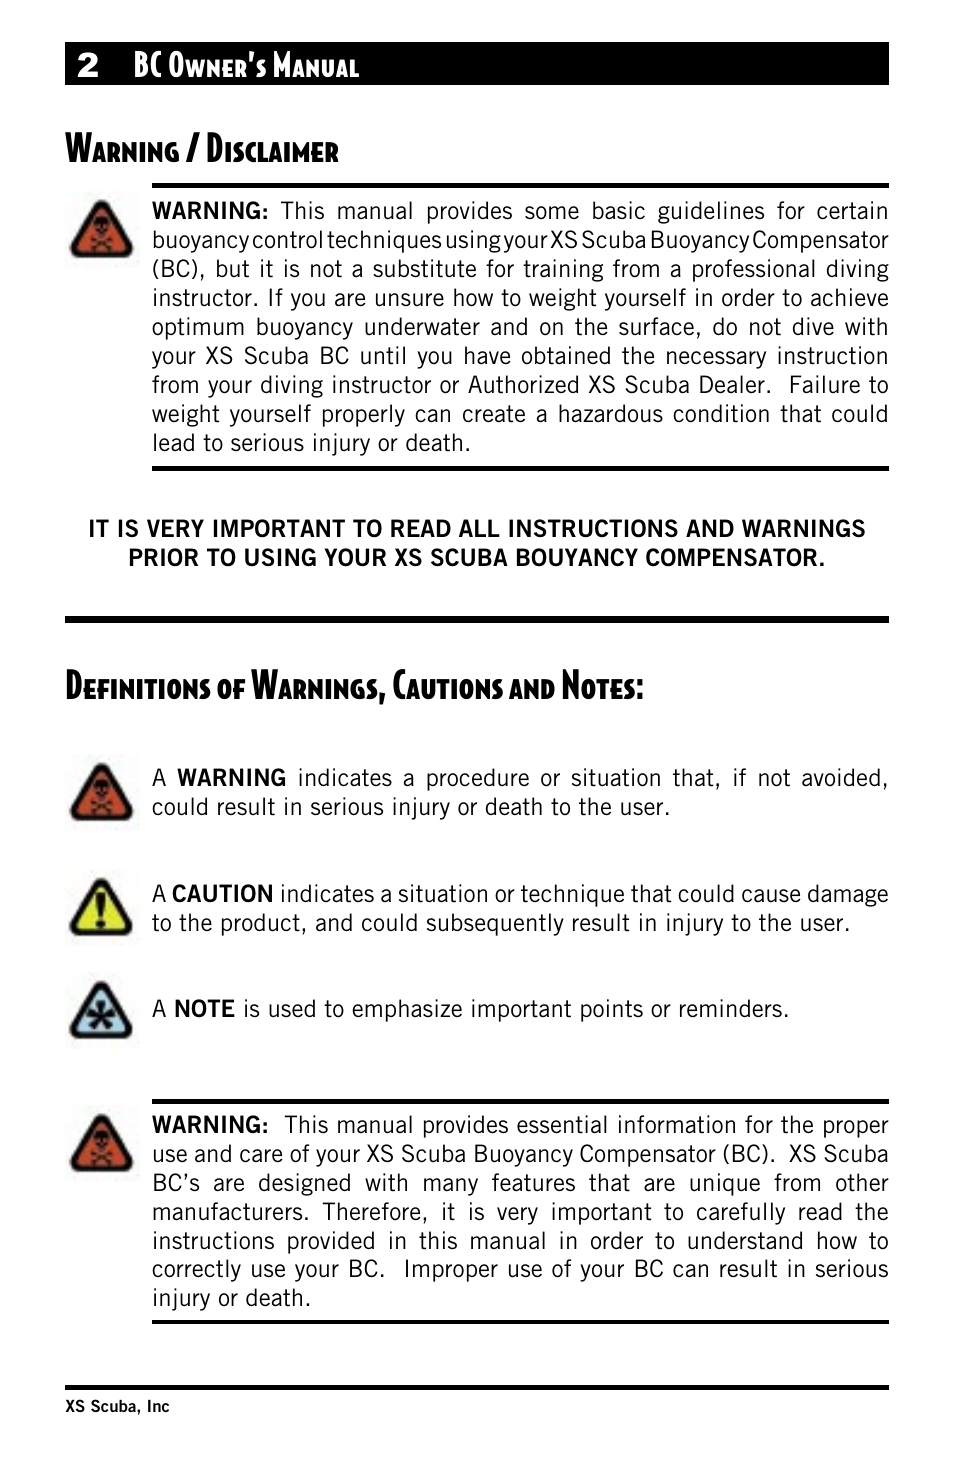 Warning / disclaimer, Defintions, 2 bc owner’s manual | XS Scuba Buoyancy Compensator User Manual | Page 2 / 24